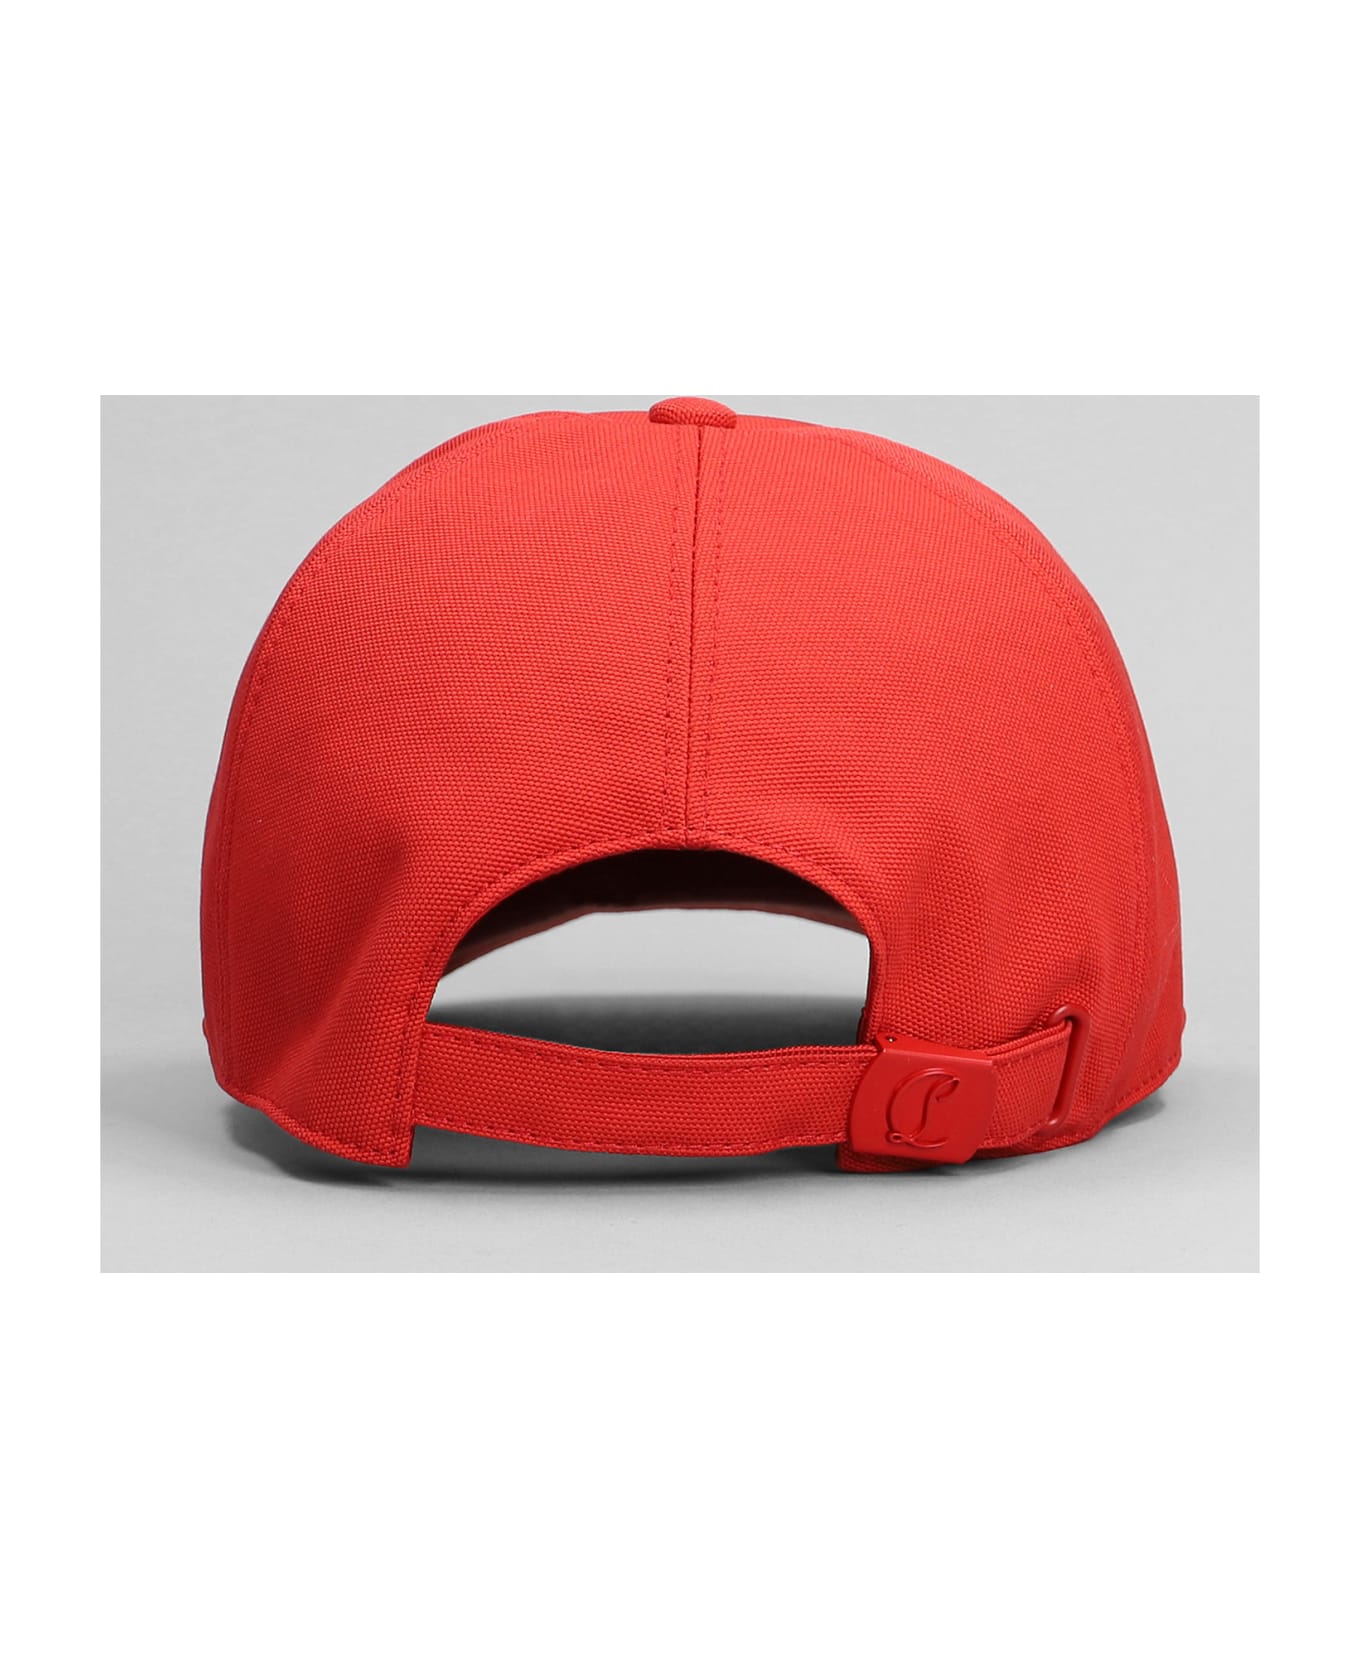 Christian Louboutin Hats In Red Cotton - red 帽子